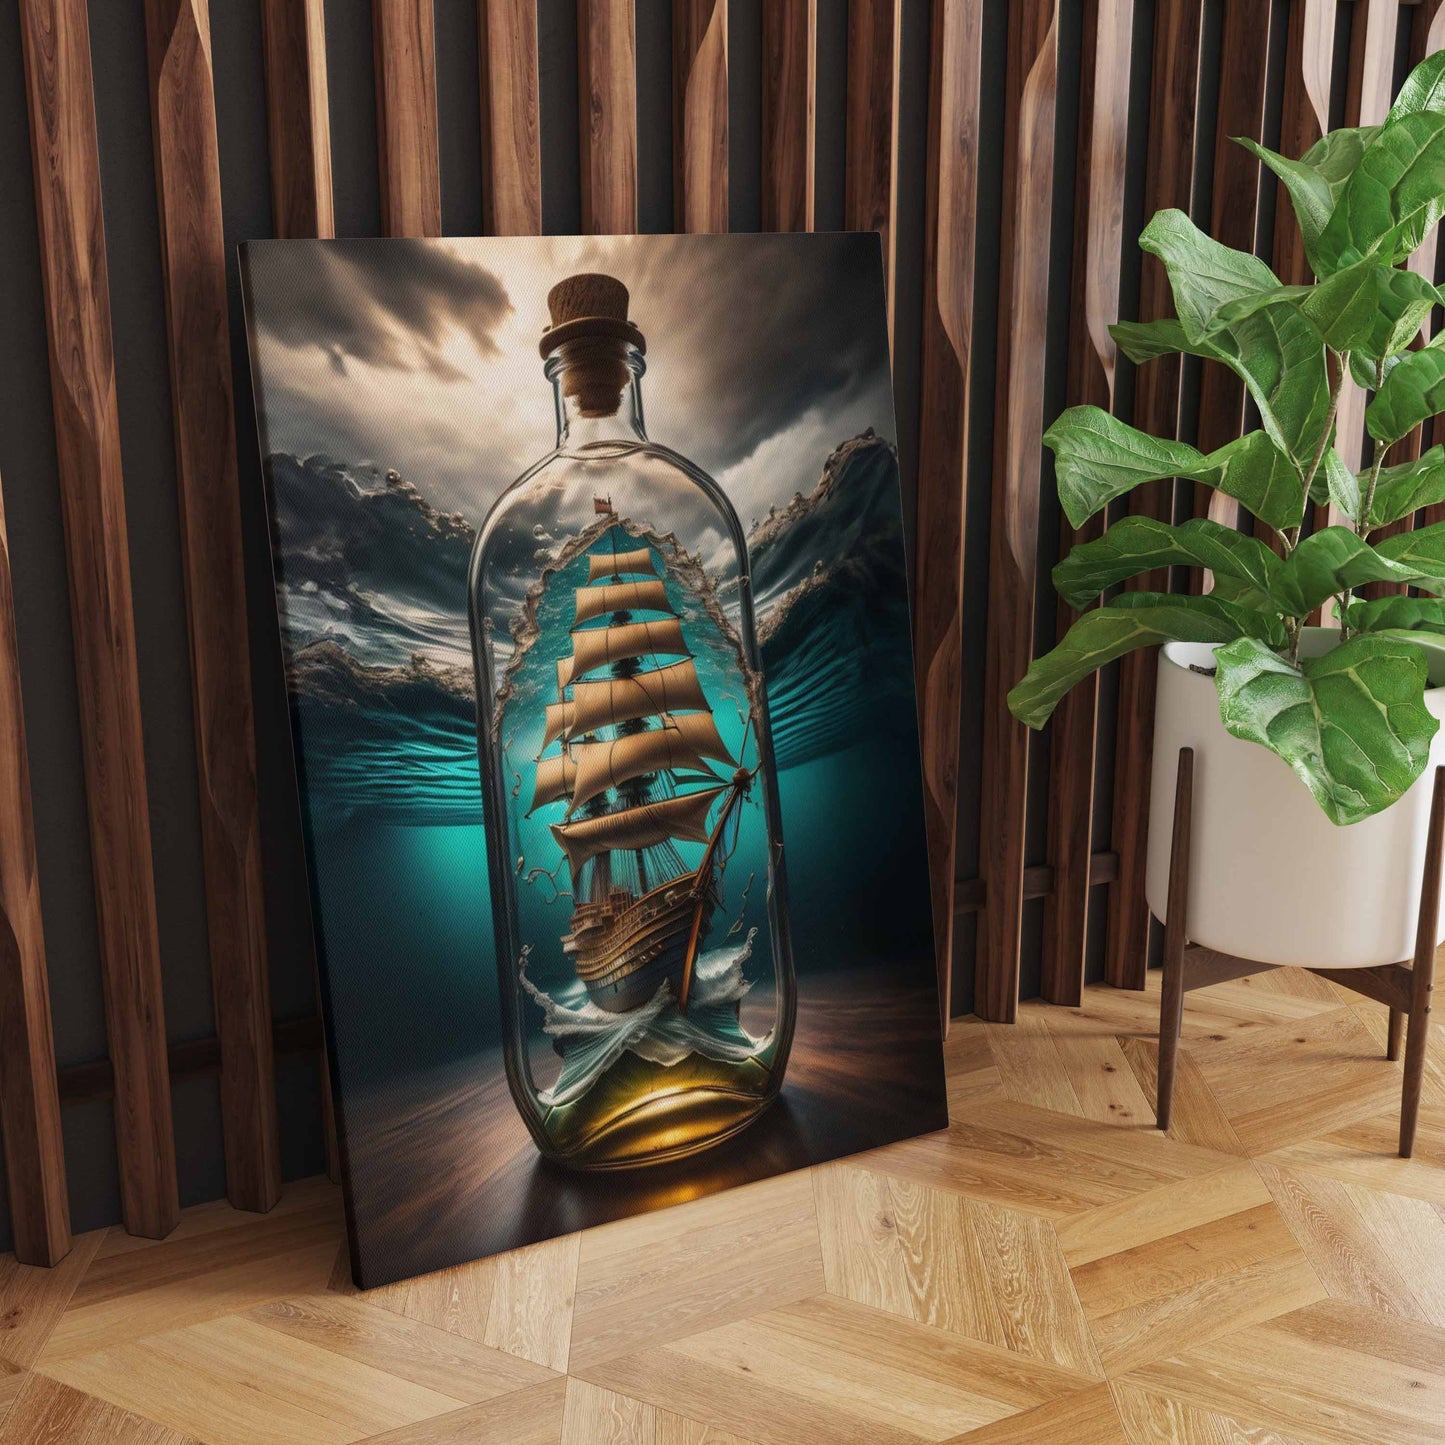 Uncharted Elegance: A Wall Art Capturing a Sailing Ship Encased in a Bottle Beneath the Ocean's Depths - A Captivating Fusion of Maritime Charm and Underwater Beauty - S05E81